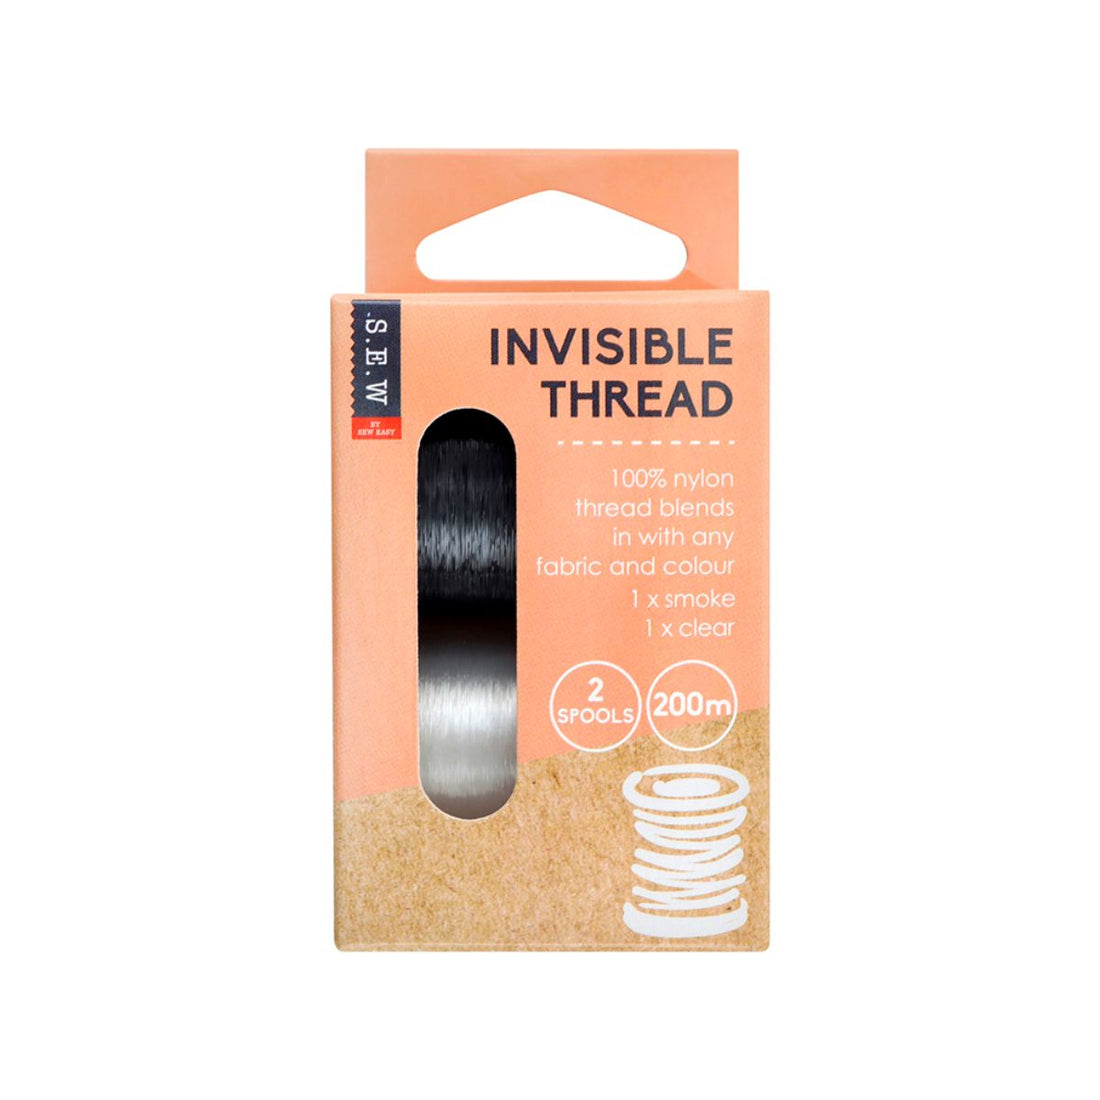 SEW invisible sewing thread twin pack